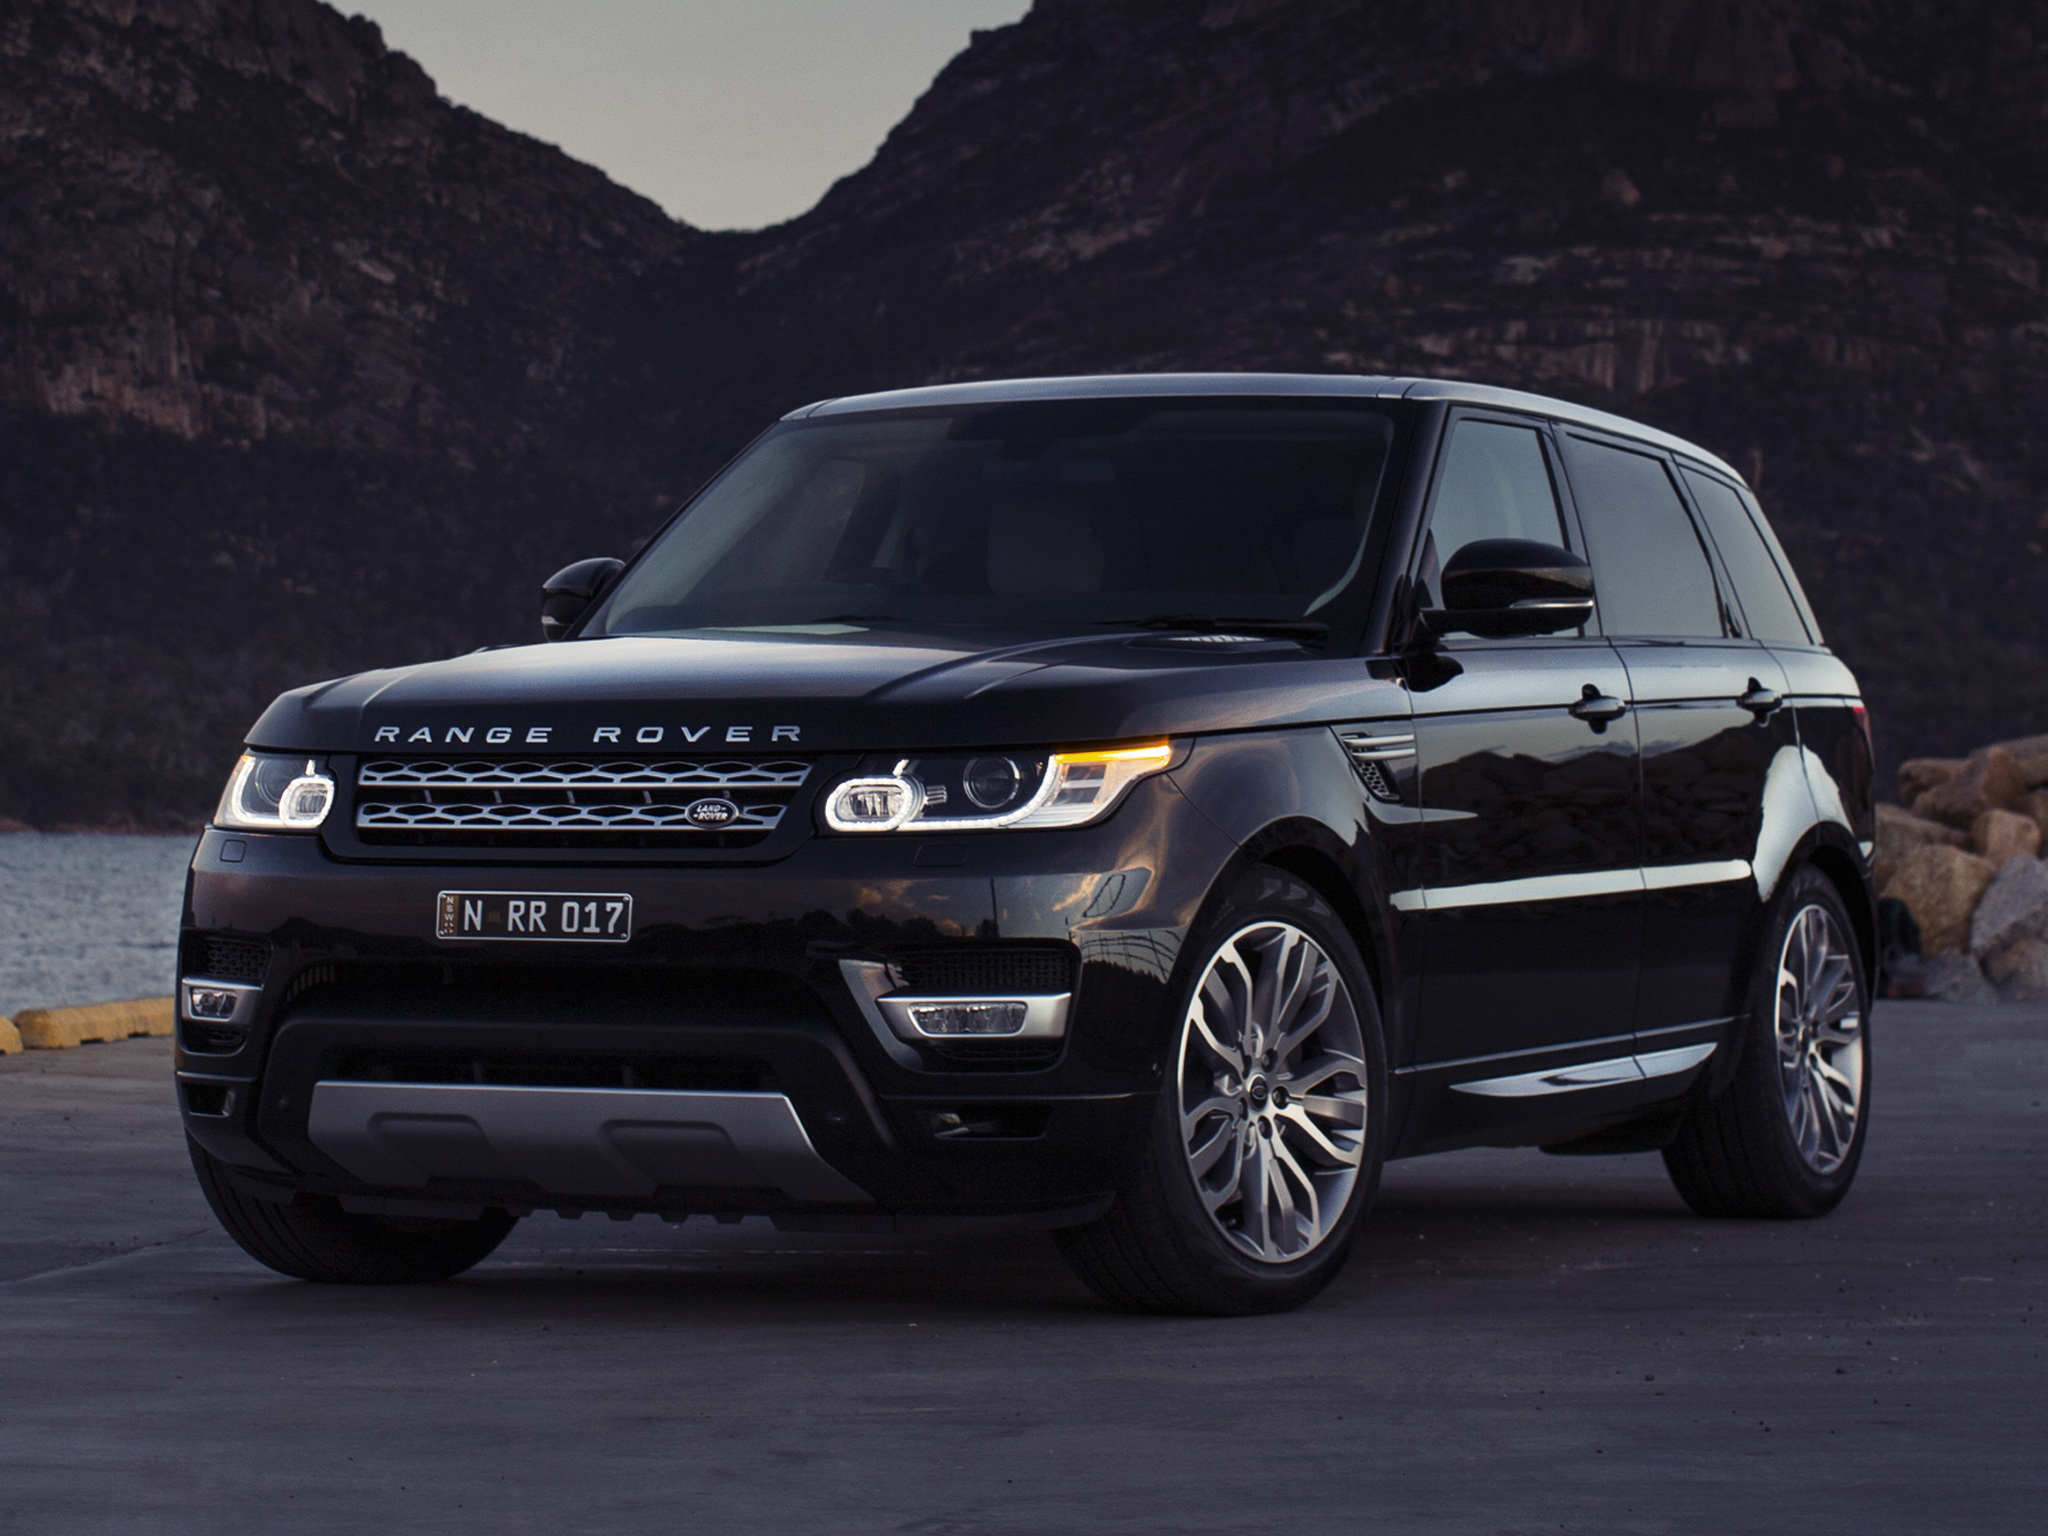 2014, Range, Rover, Sport, Autobiography, Au spec, Suv, Awd, Luxury Wallpapers  HD / Desktop and Mobile Backgrounds